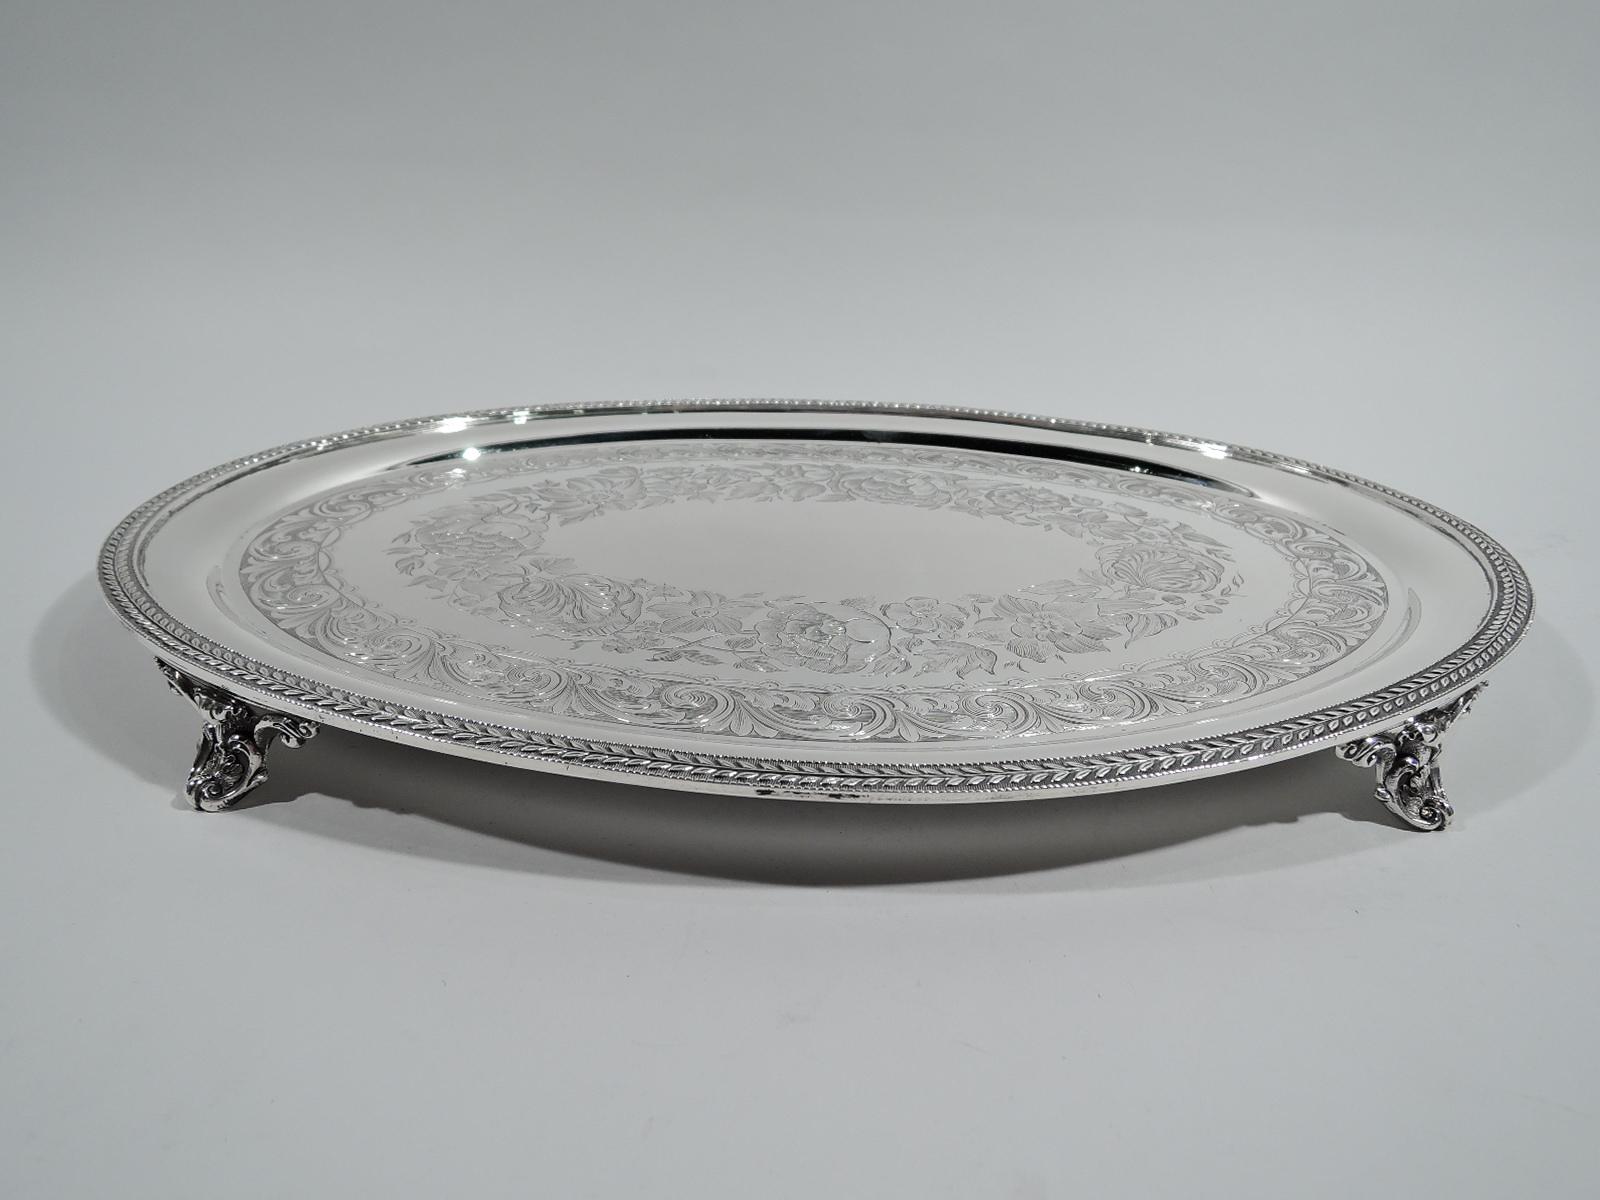 Beautiful Victorian Classical coin silver tray. Made by William Forbes for Ball, Black in New York, ca 1850. Oval well engraved with lushly engraved floral wreath (vacant) and scroll and leaf border. Flat and beaded rim applied with leaf border on